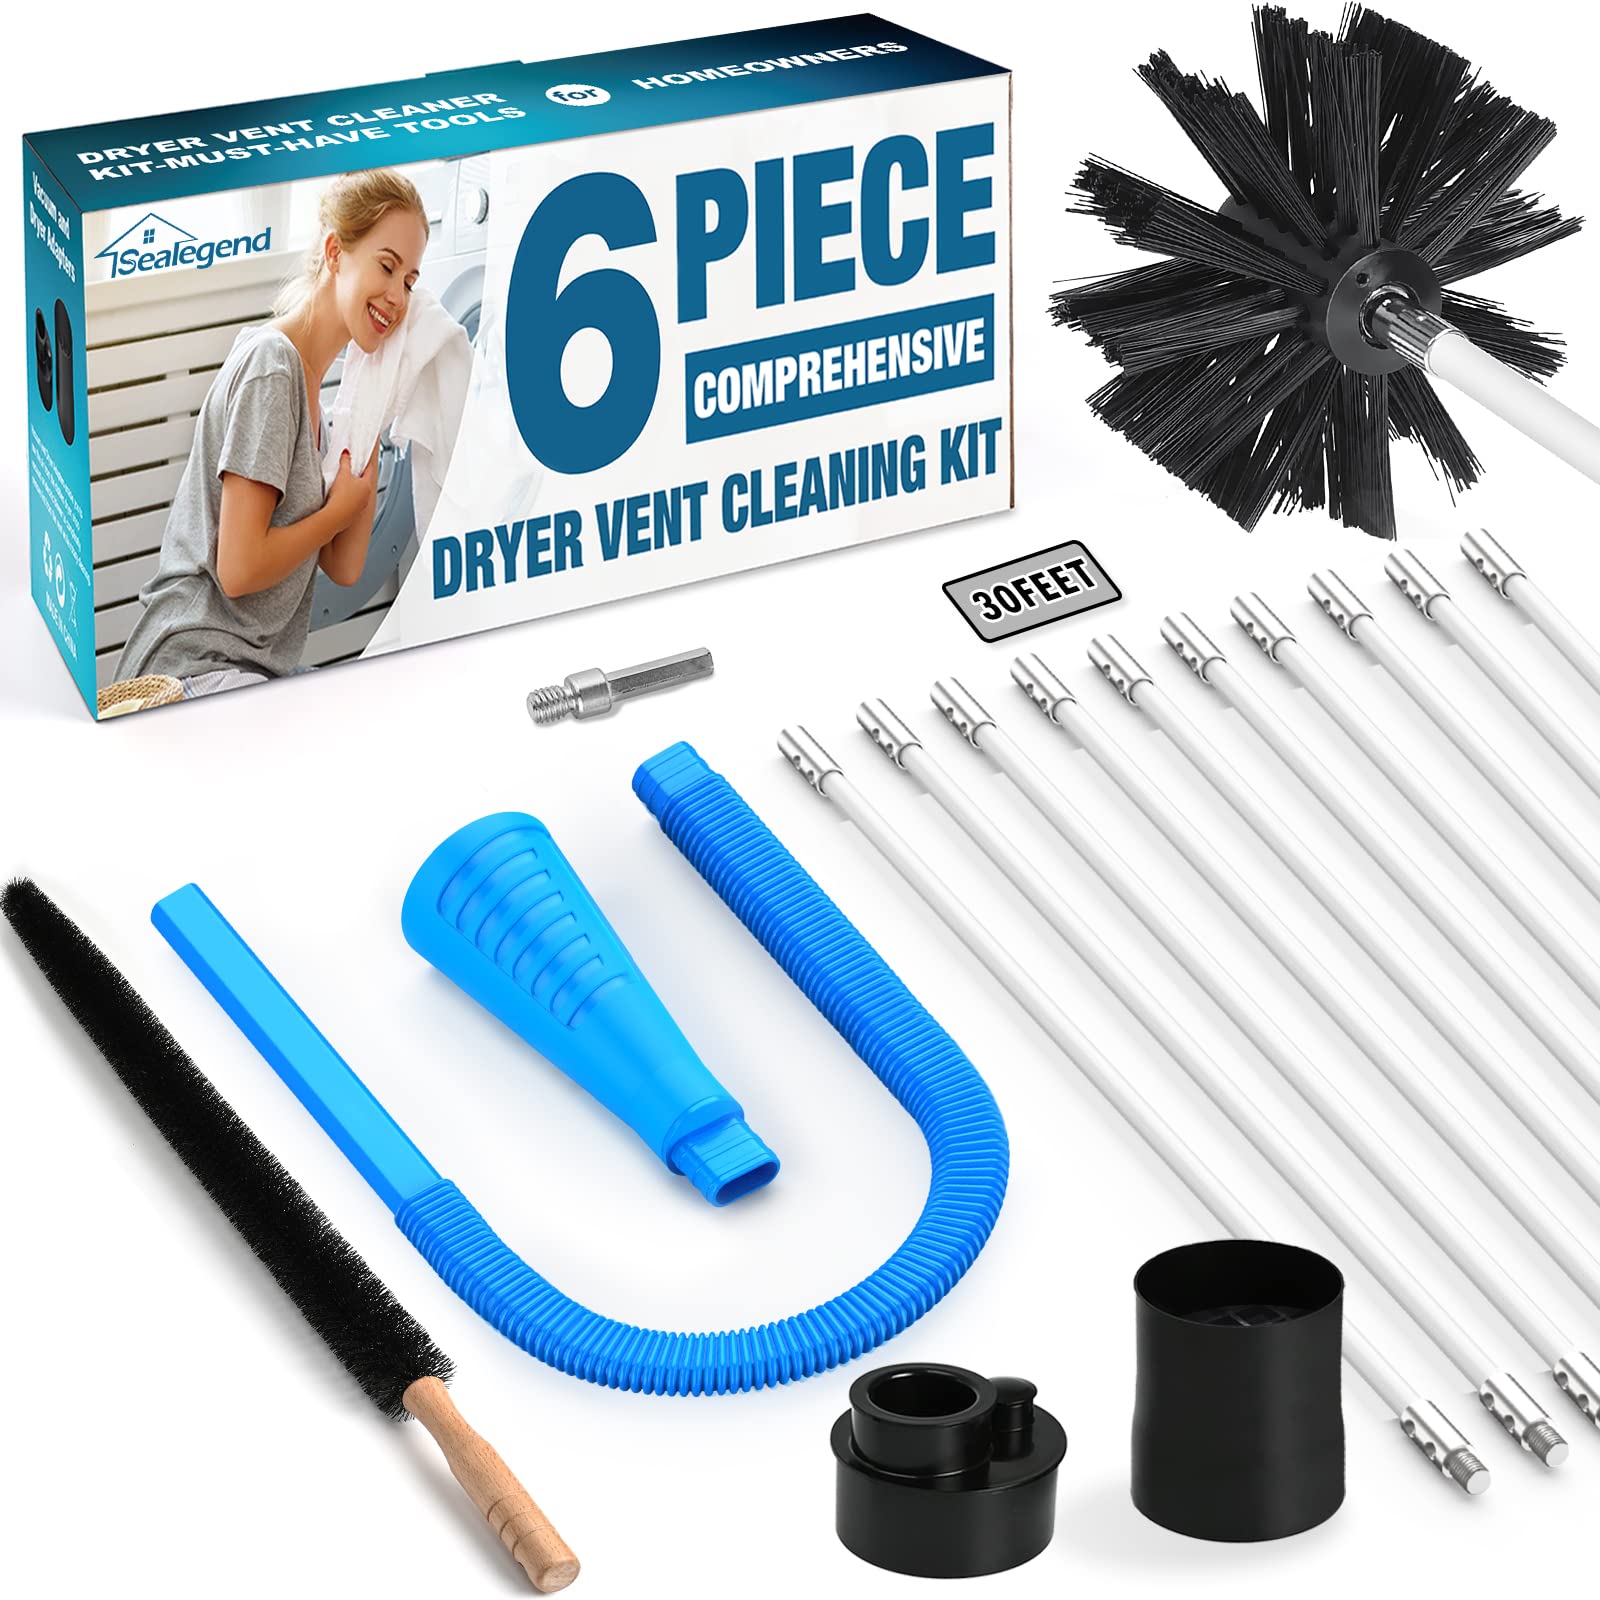 3 Pack Dryer Vent Cleaner Kit, 40 Feet Dryer Vent Brush with Drill